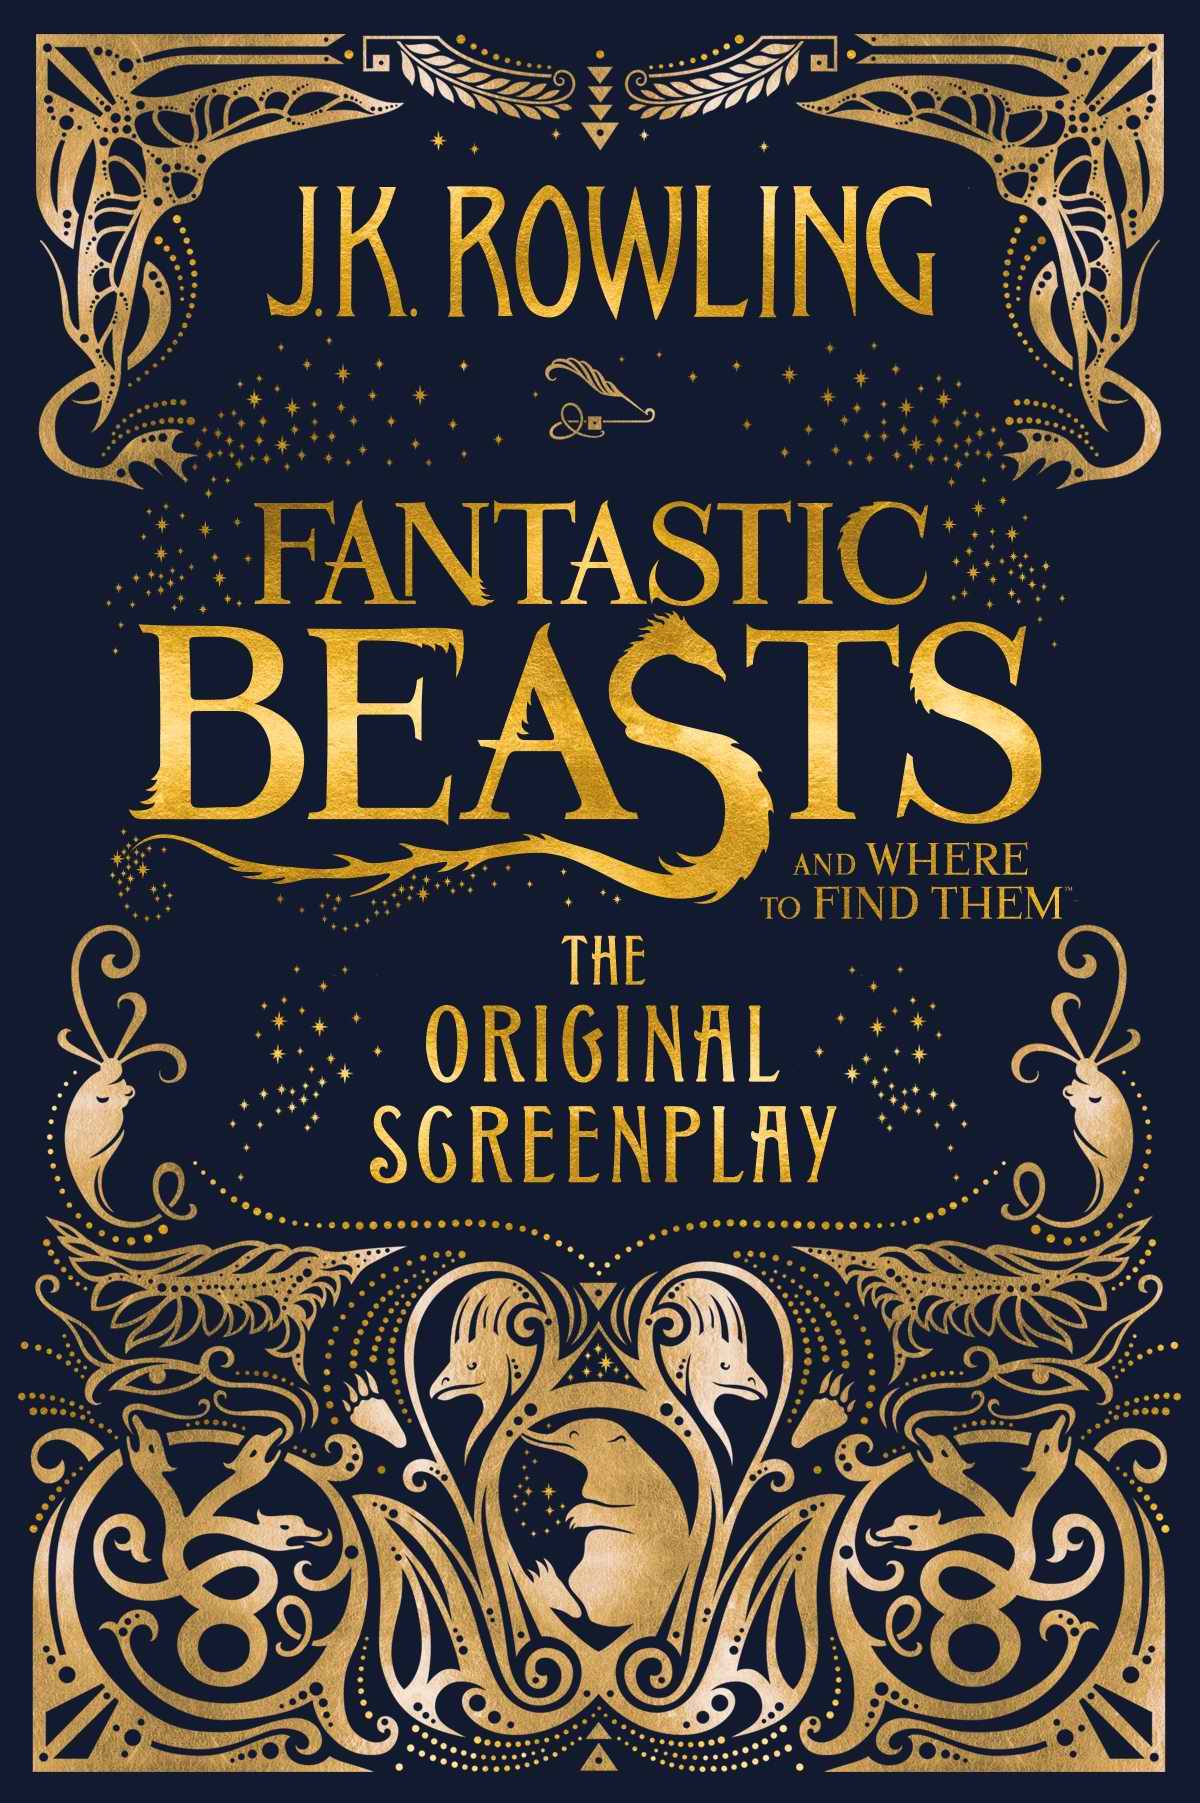 Fantastic Beasts and Where to Find Them：The Original Screenplay